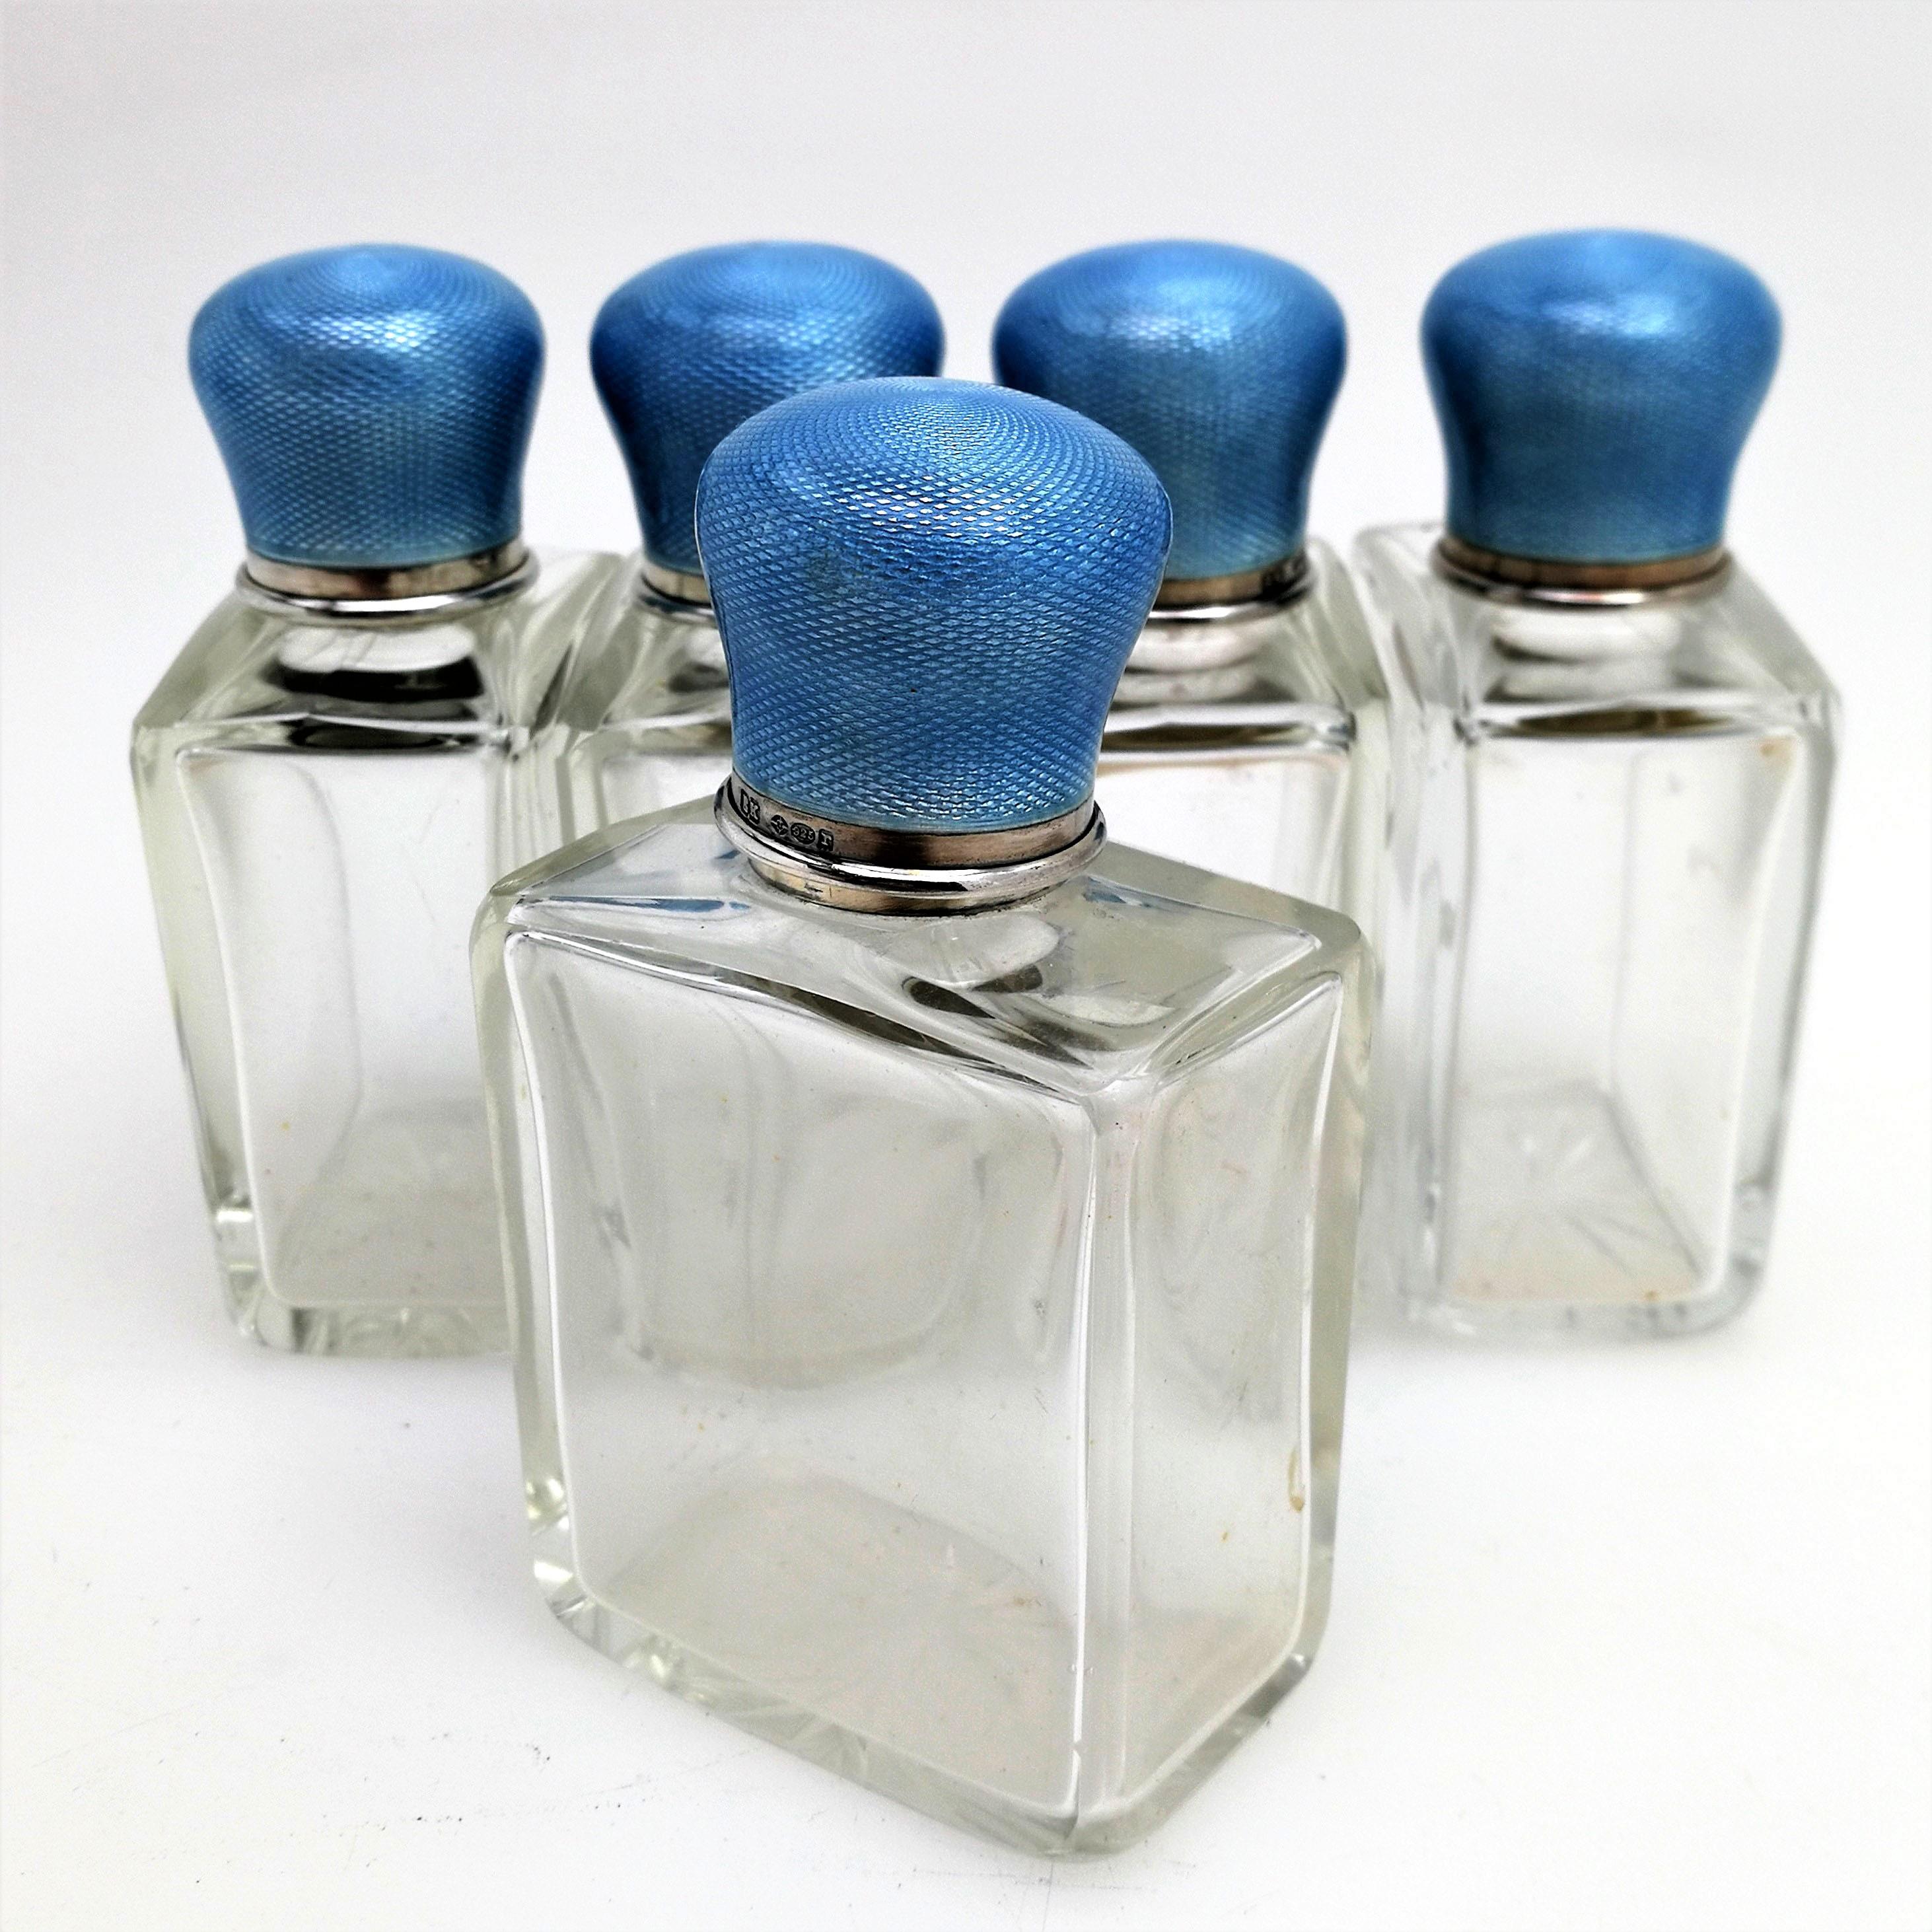 Set of 5 Silver and Enamel Topped Glass Scent Bottles 1912 Perfume / Cosmetics For Sale 2